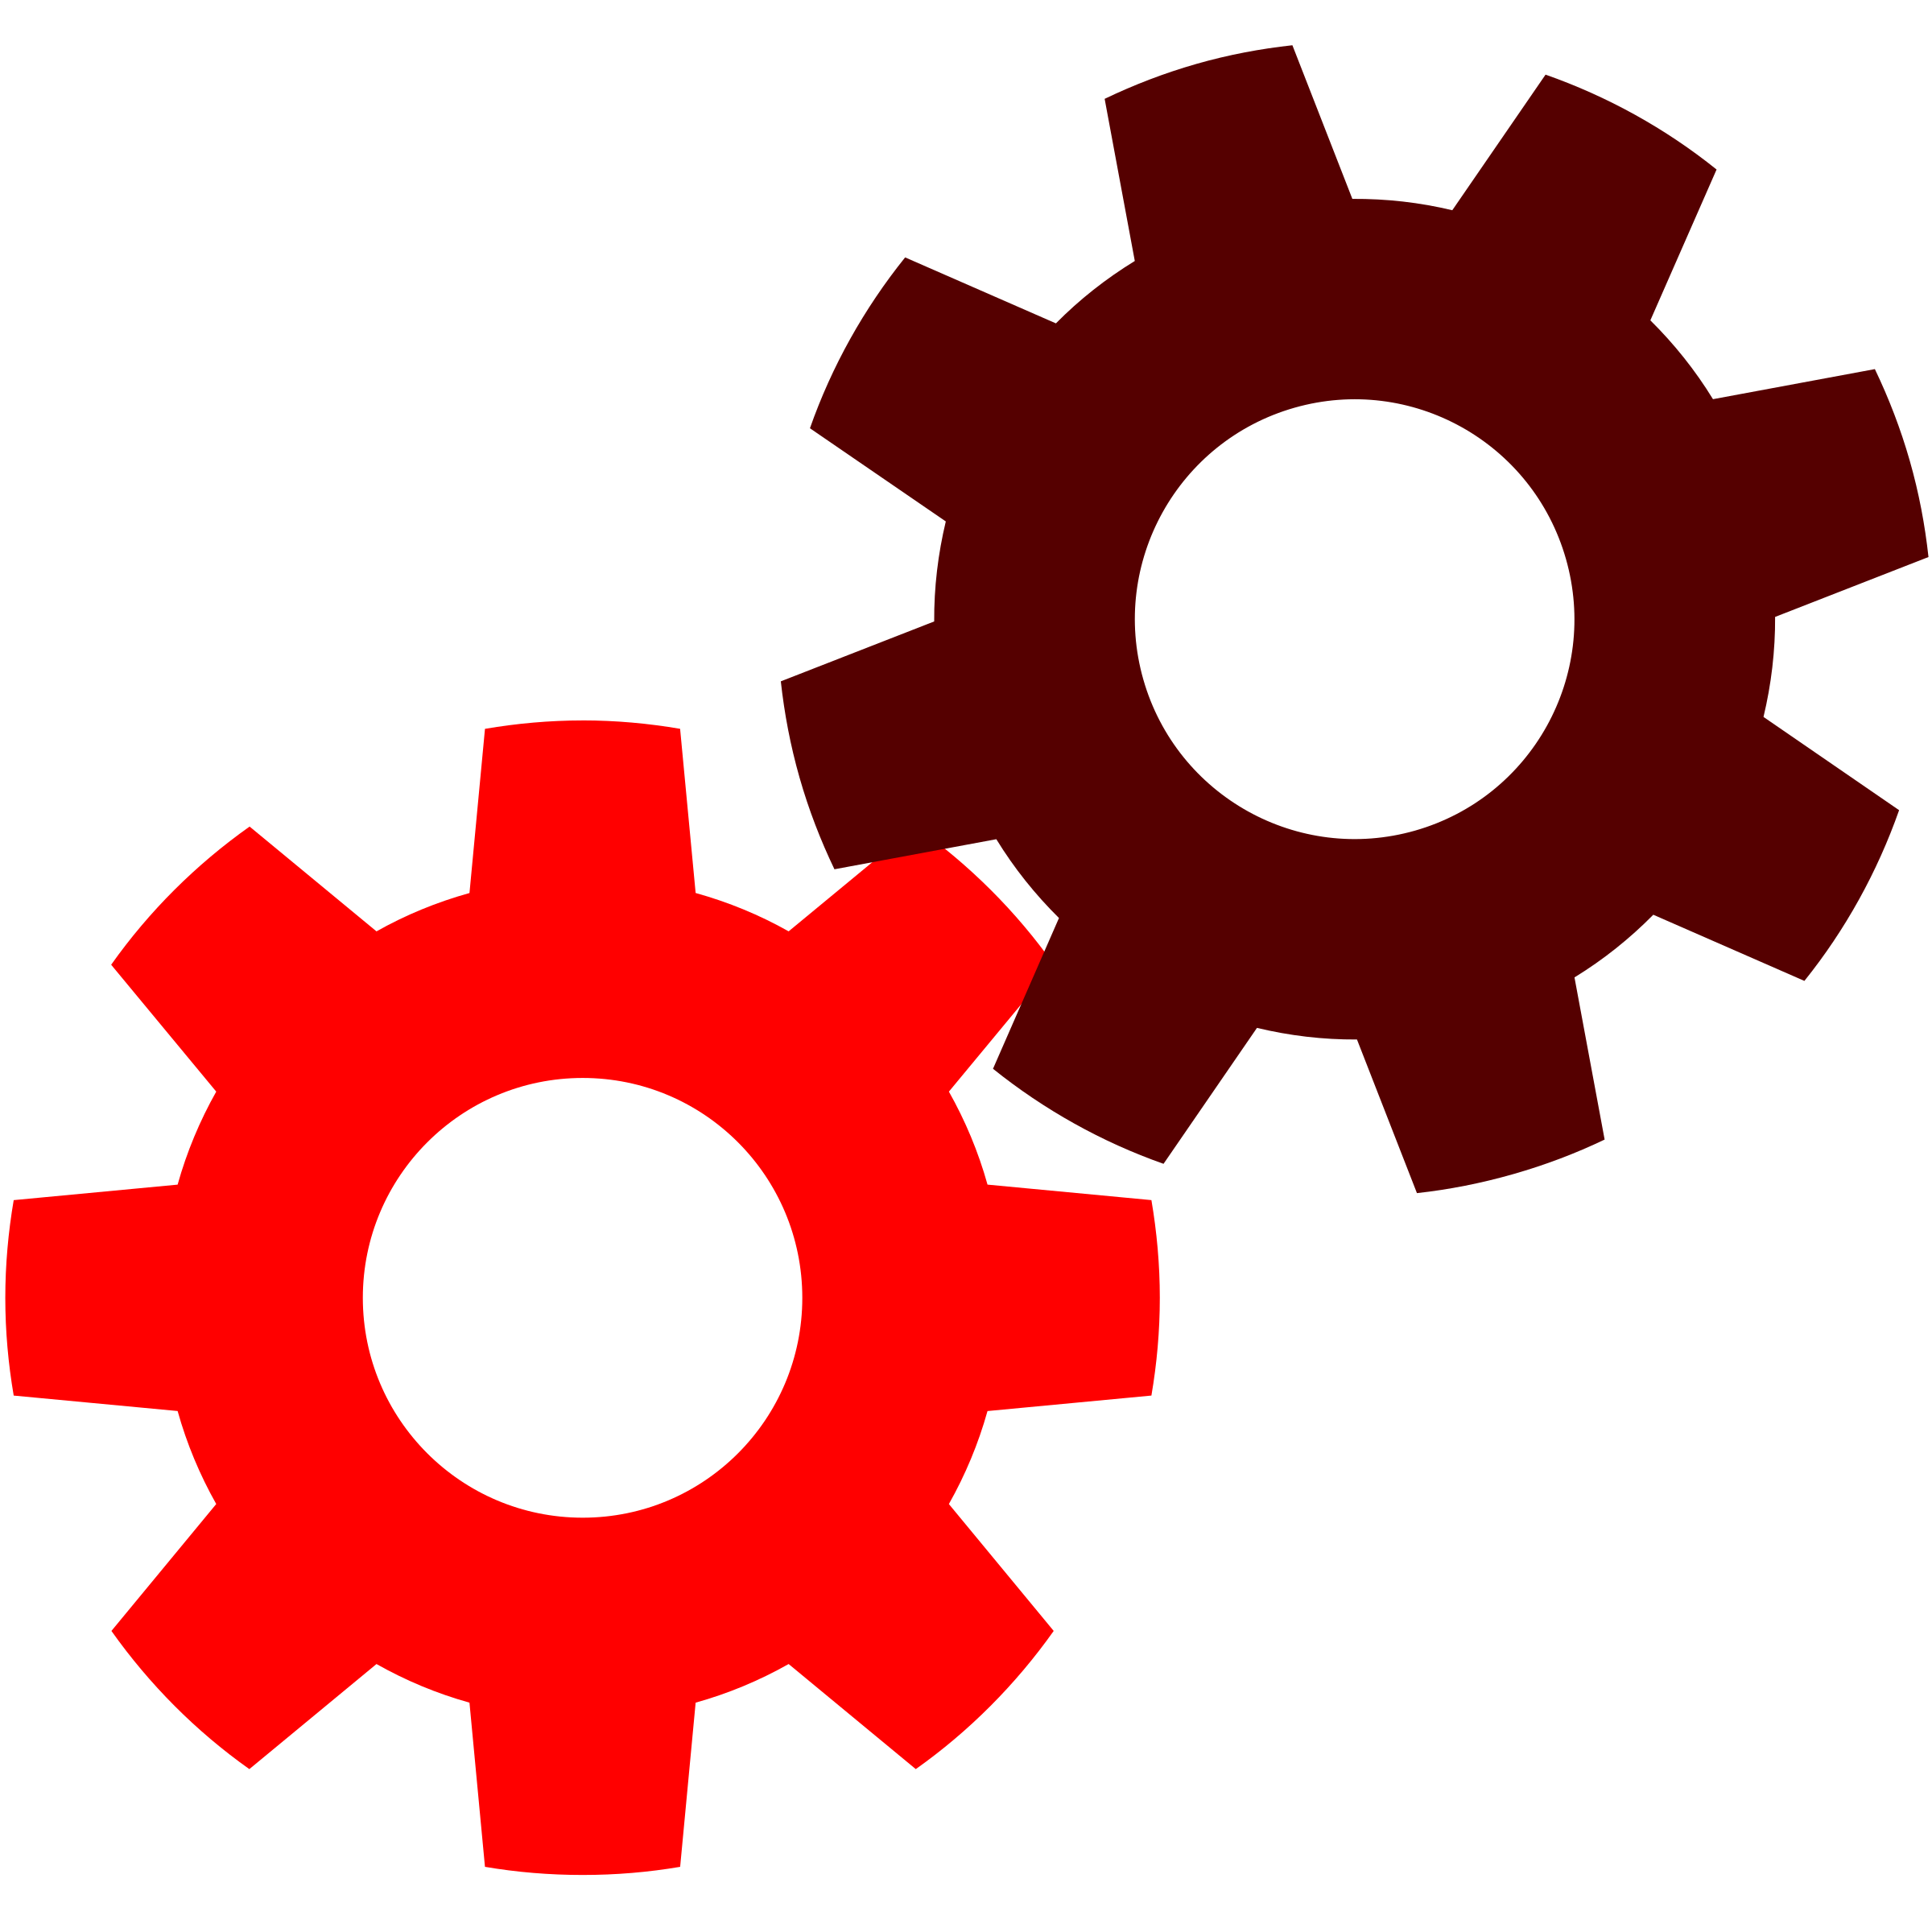 Gears clipart red, Gears red Transparent FREE for download